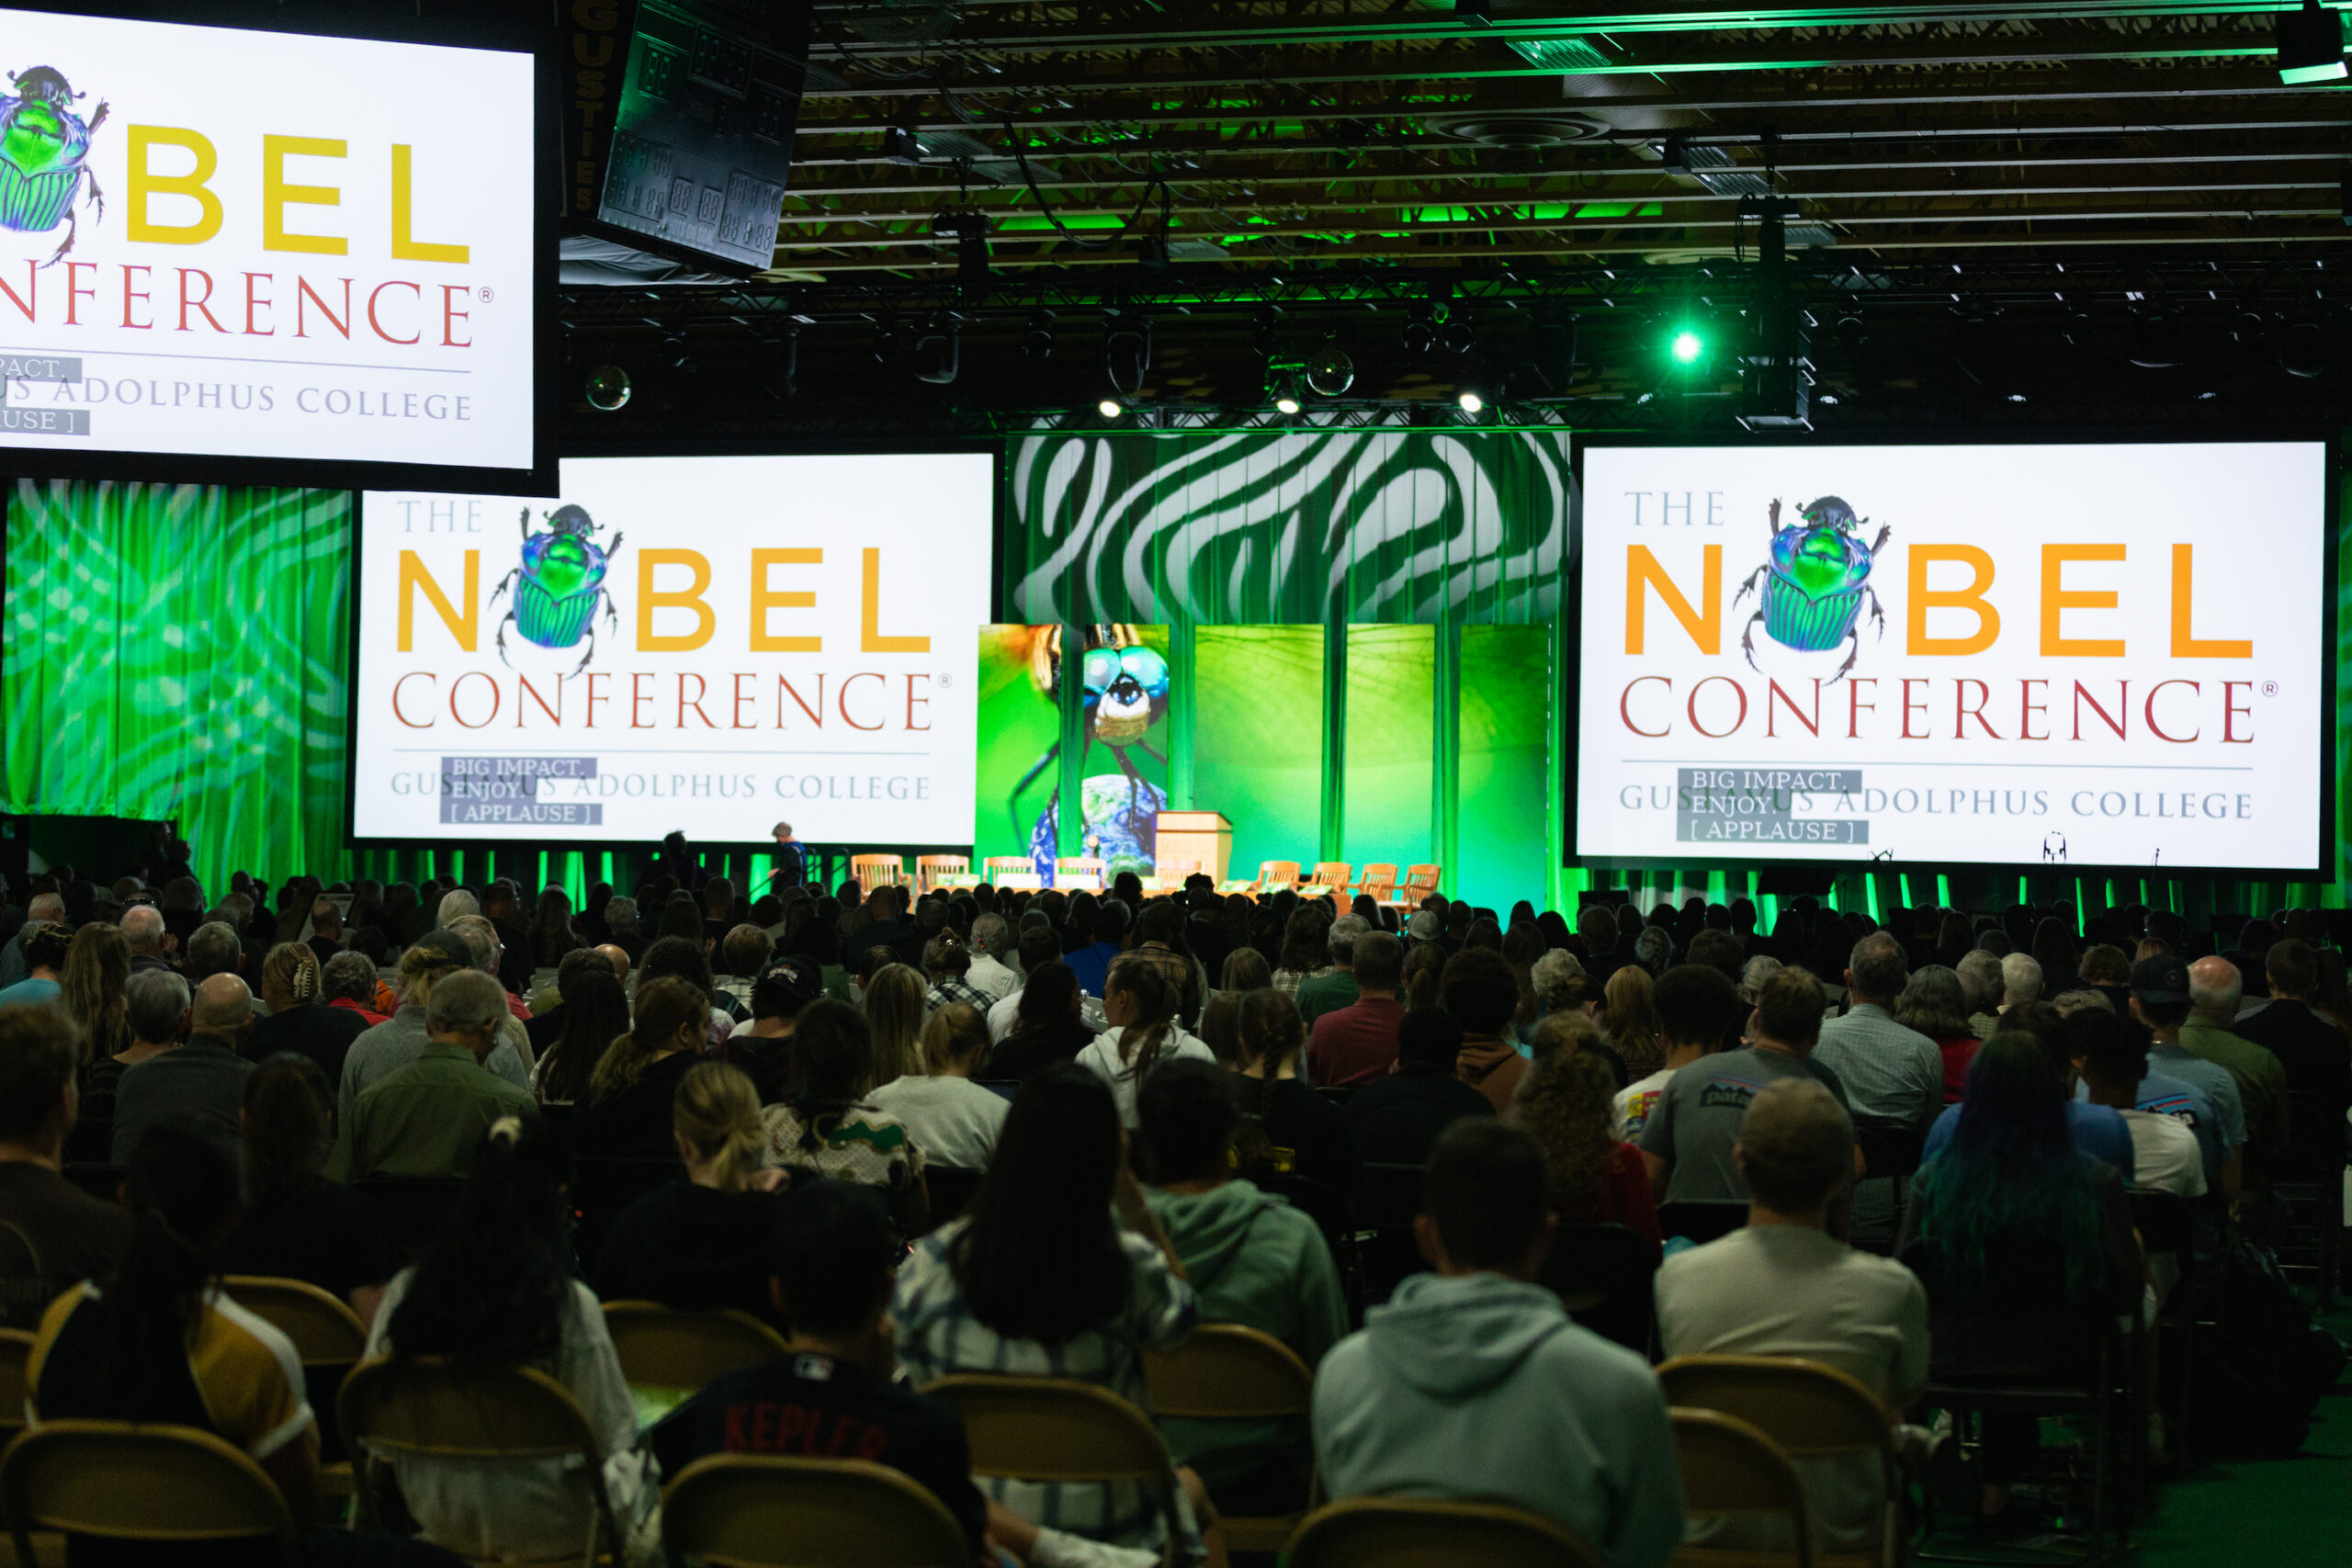 Heroic Productions Delivers Audiovisual to Gustavus Adolphus College’s Nobel Conference